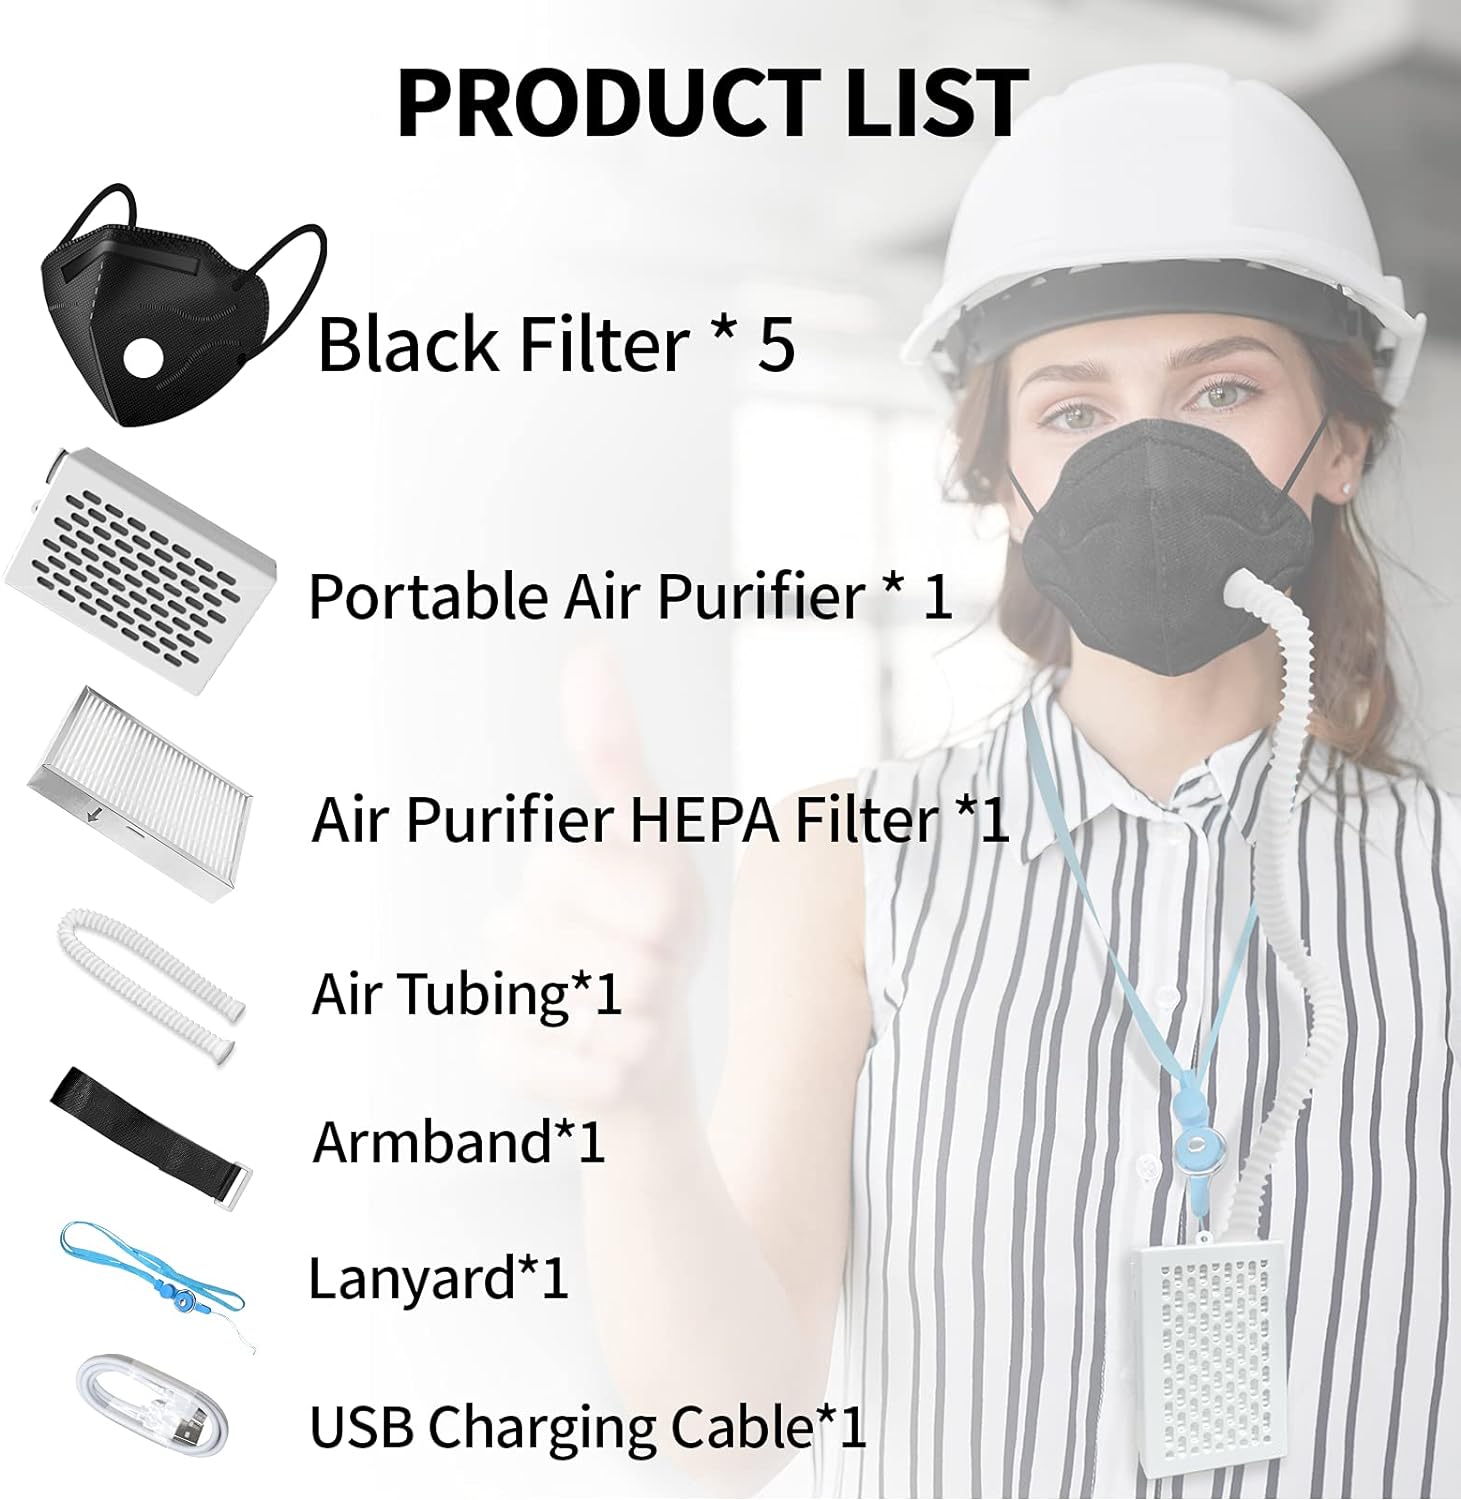 Generic Bwinmak Electric Wearable PAPR Powered Air Purifying Maskes With HEPA Filter,for Dust Work,Painting, Machine Polishing, Welding